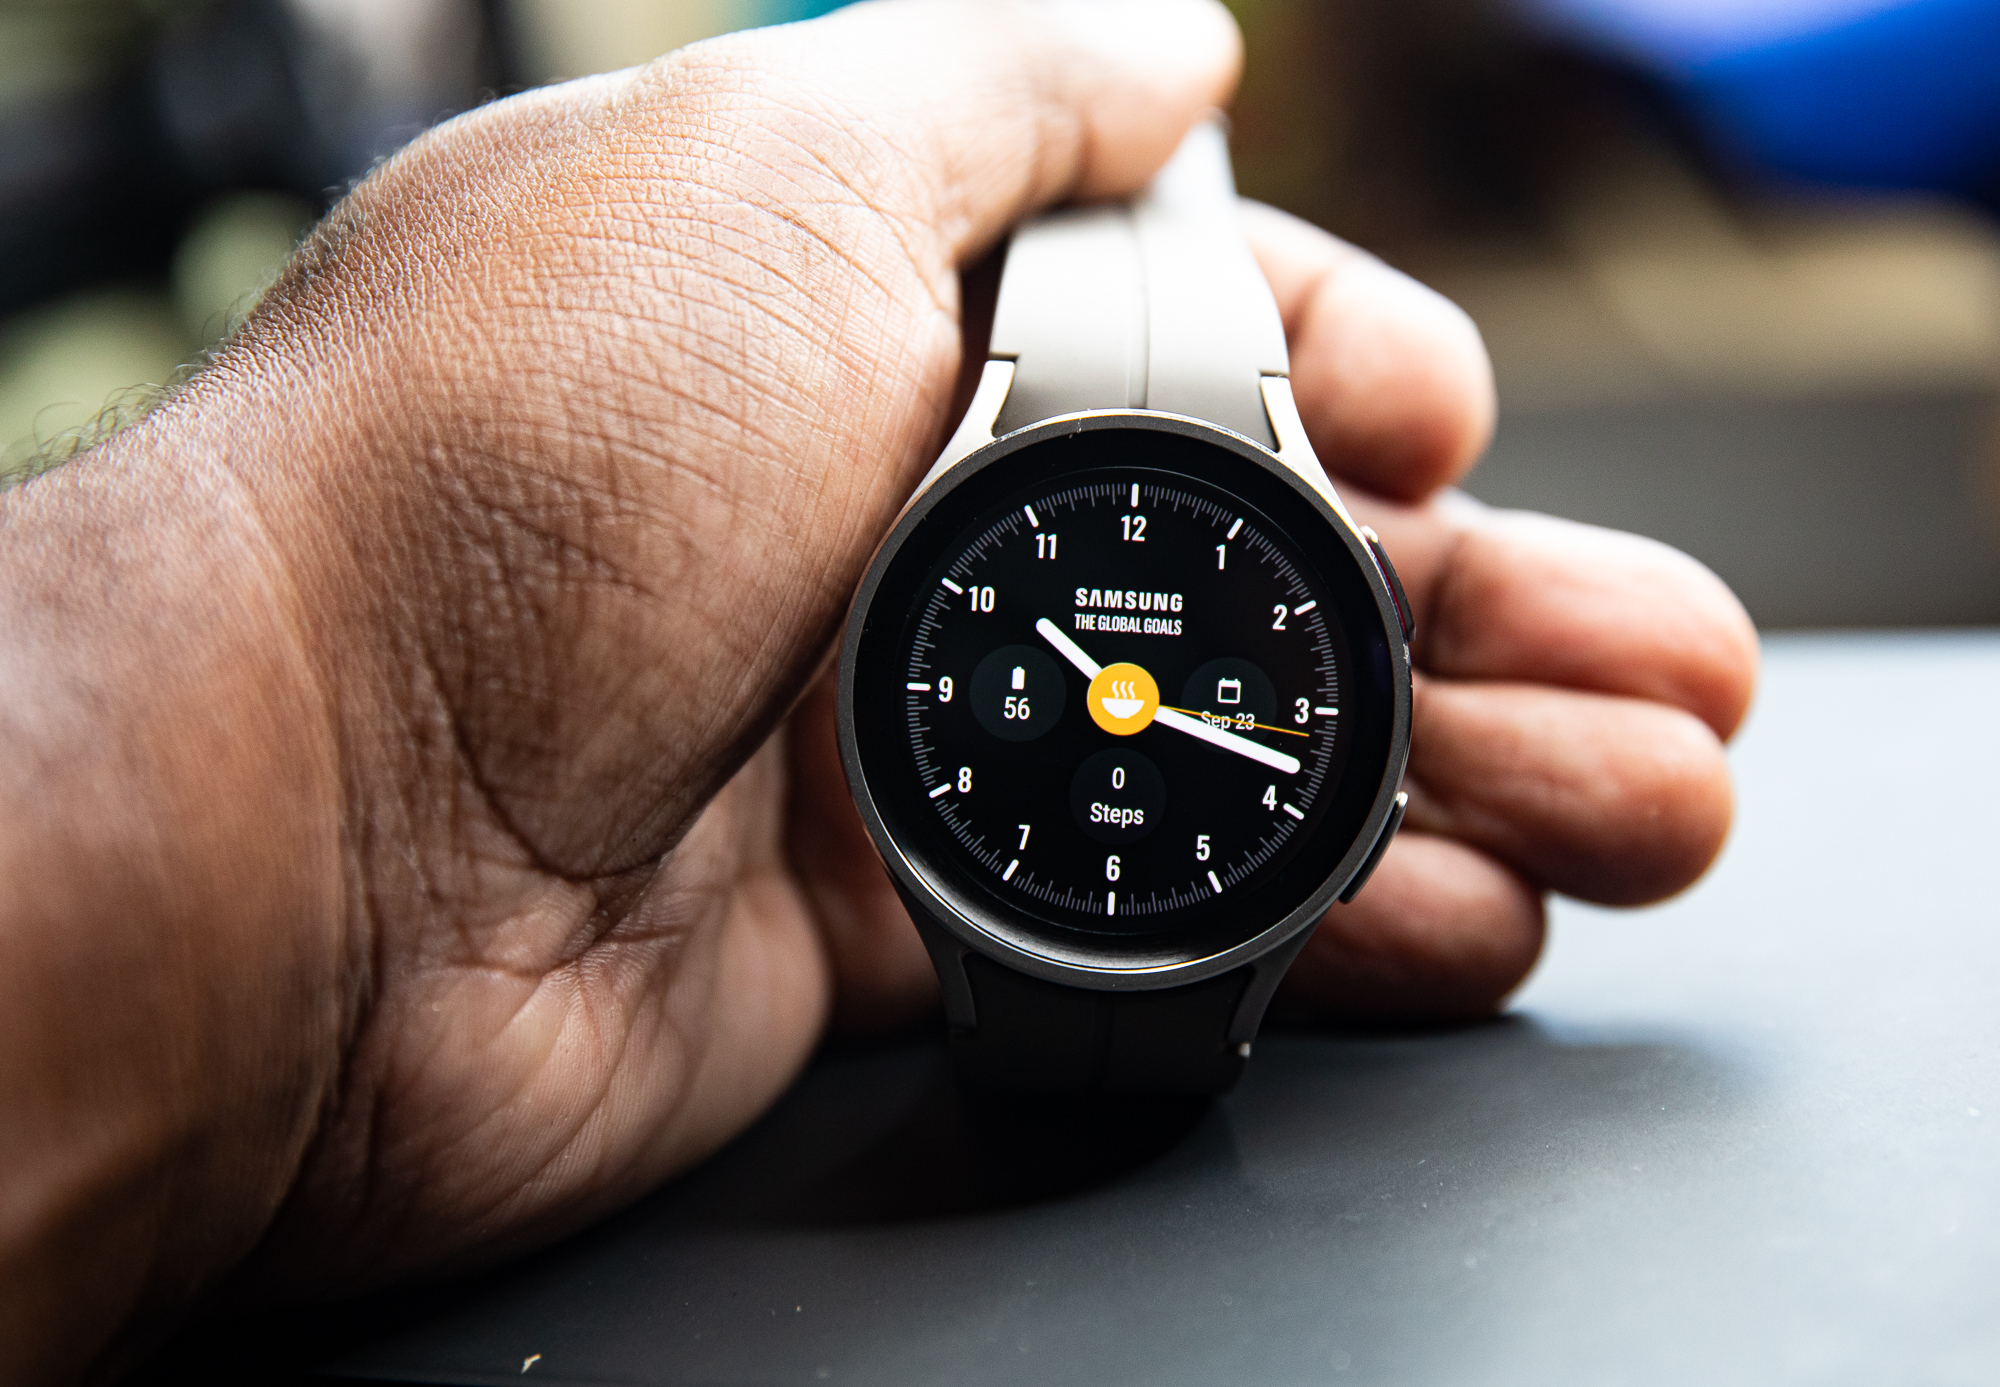 Samsung Galaxy Watch5 Pro is the best smartwatch for Android